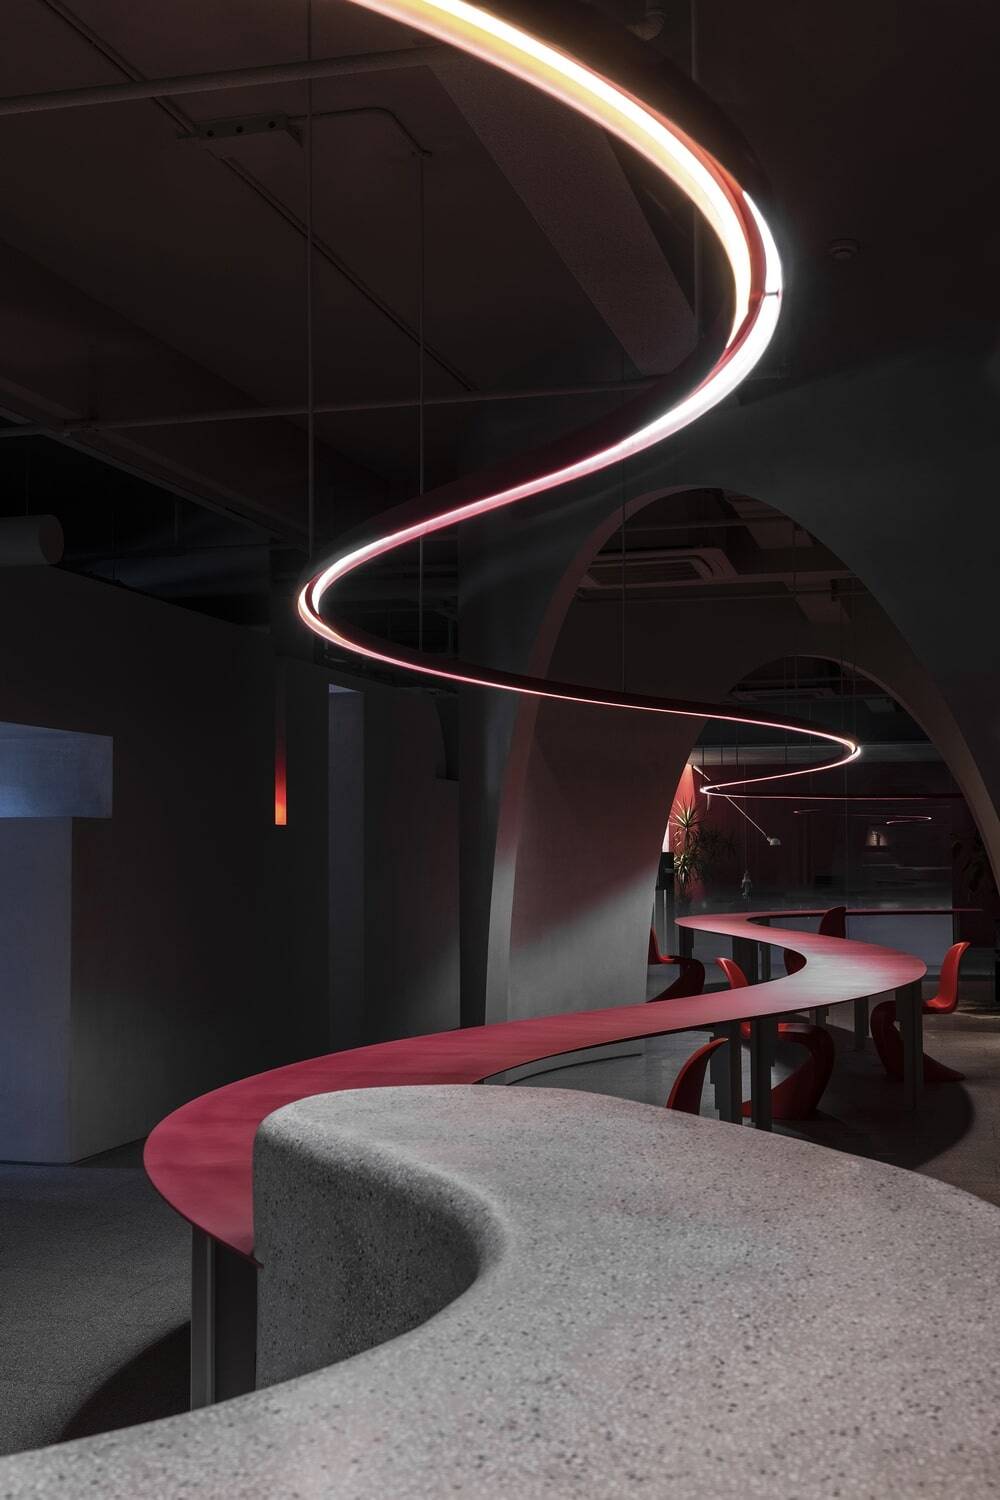 MMC Design Explores Poetry and Eternity in a Working & Exhibition Space